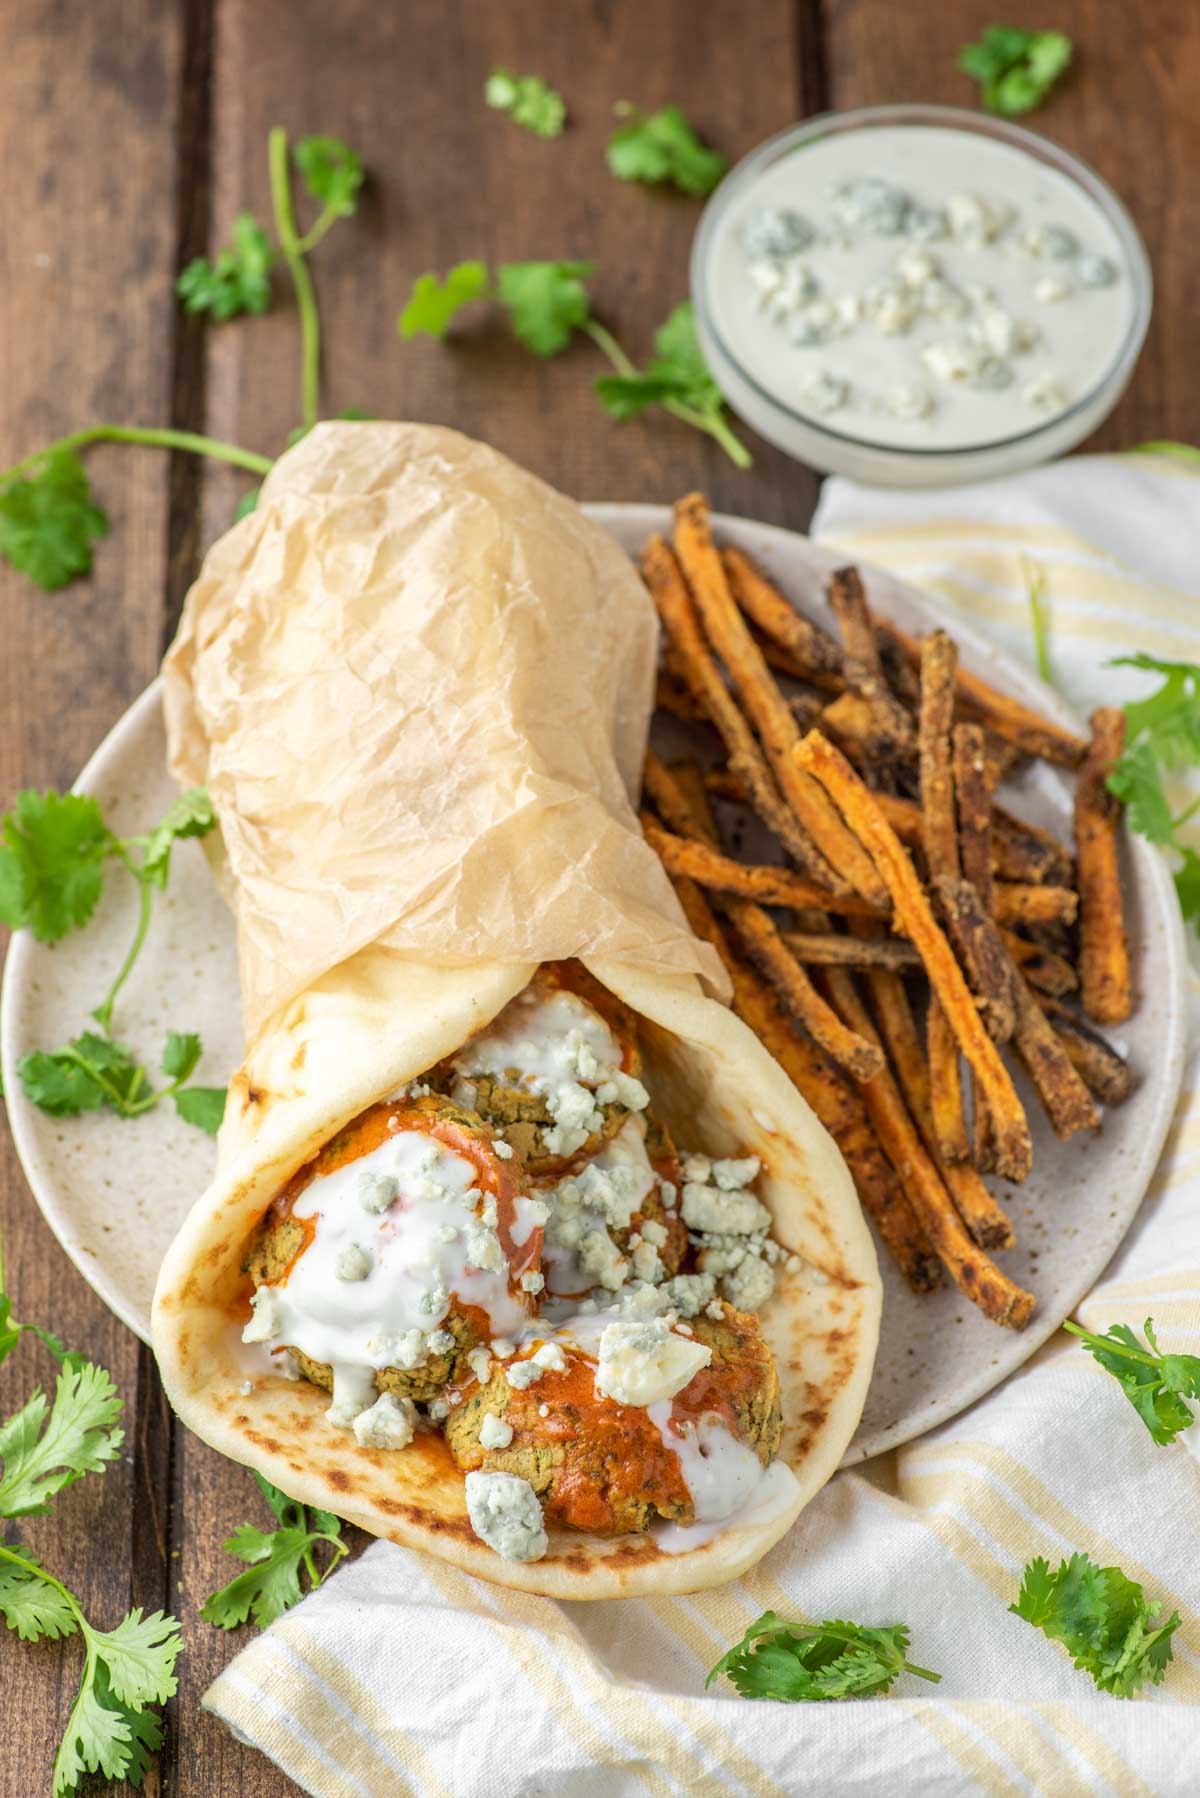 buffalo falafel with naan and sweet potato fries on plate